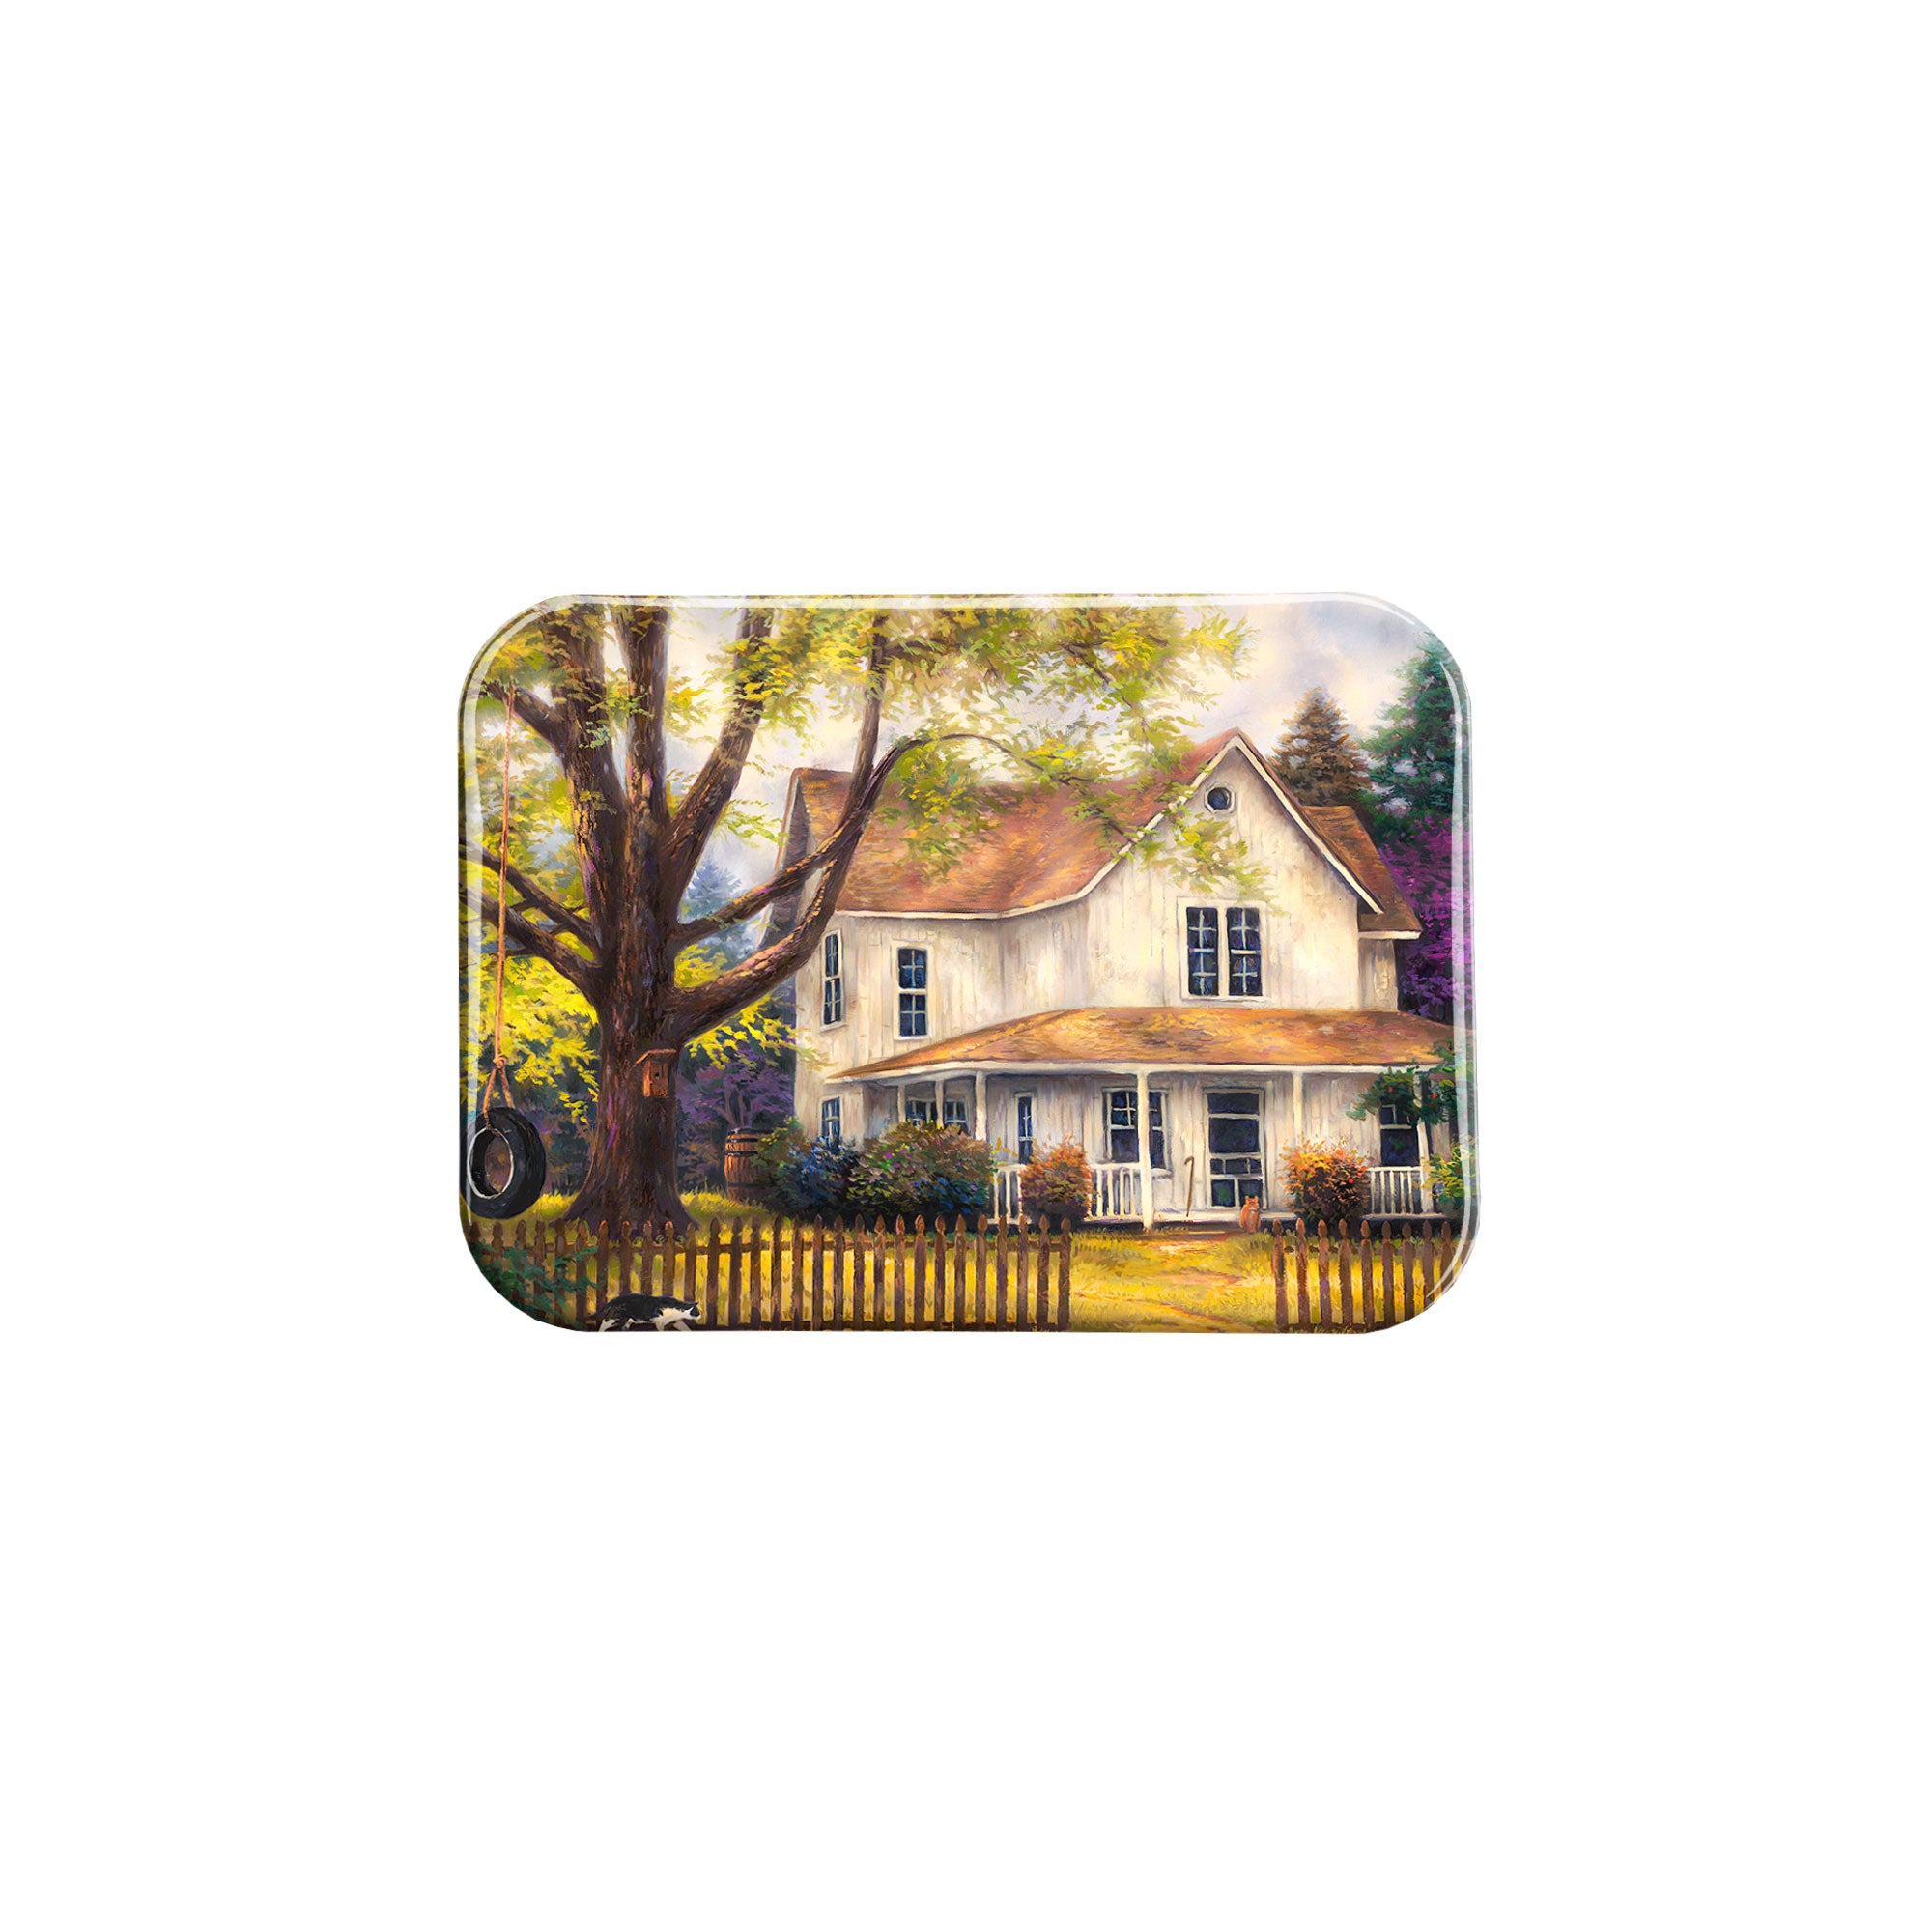 "Simple Country" - 2.5" X 3.5" Rectangle Fridge Magnets